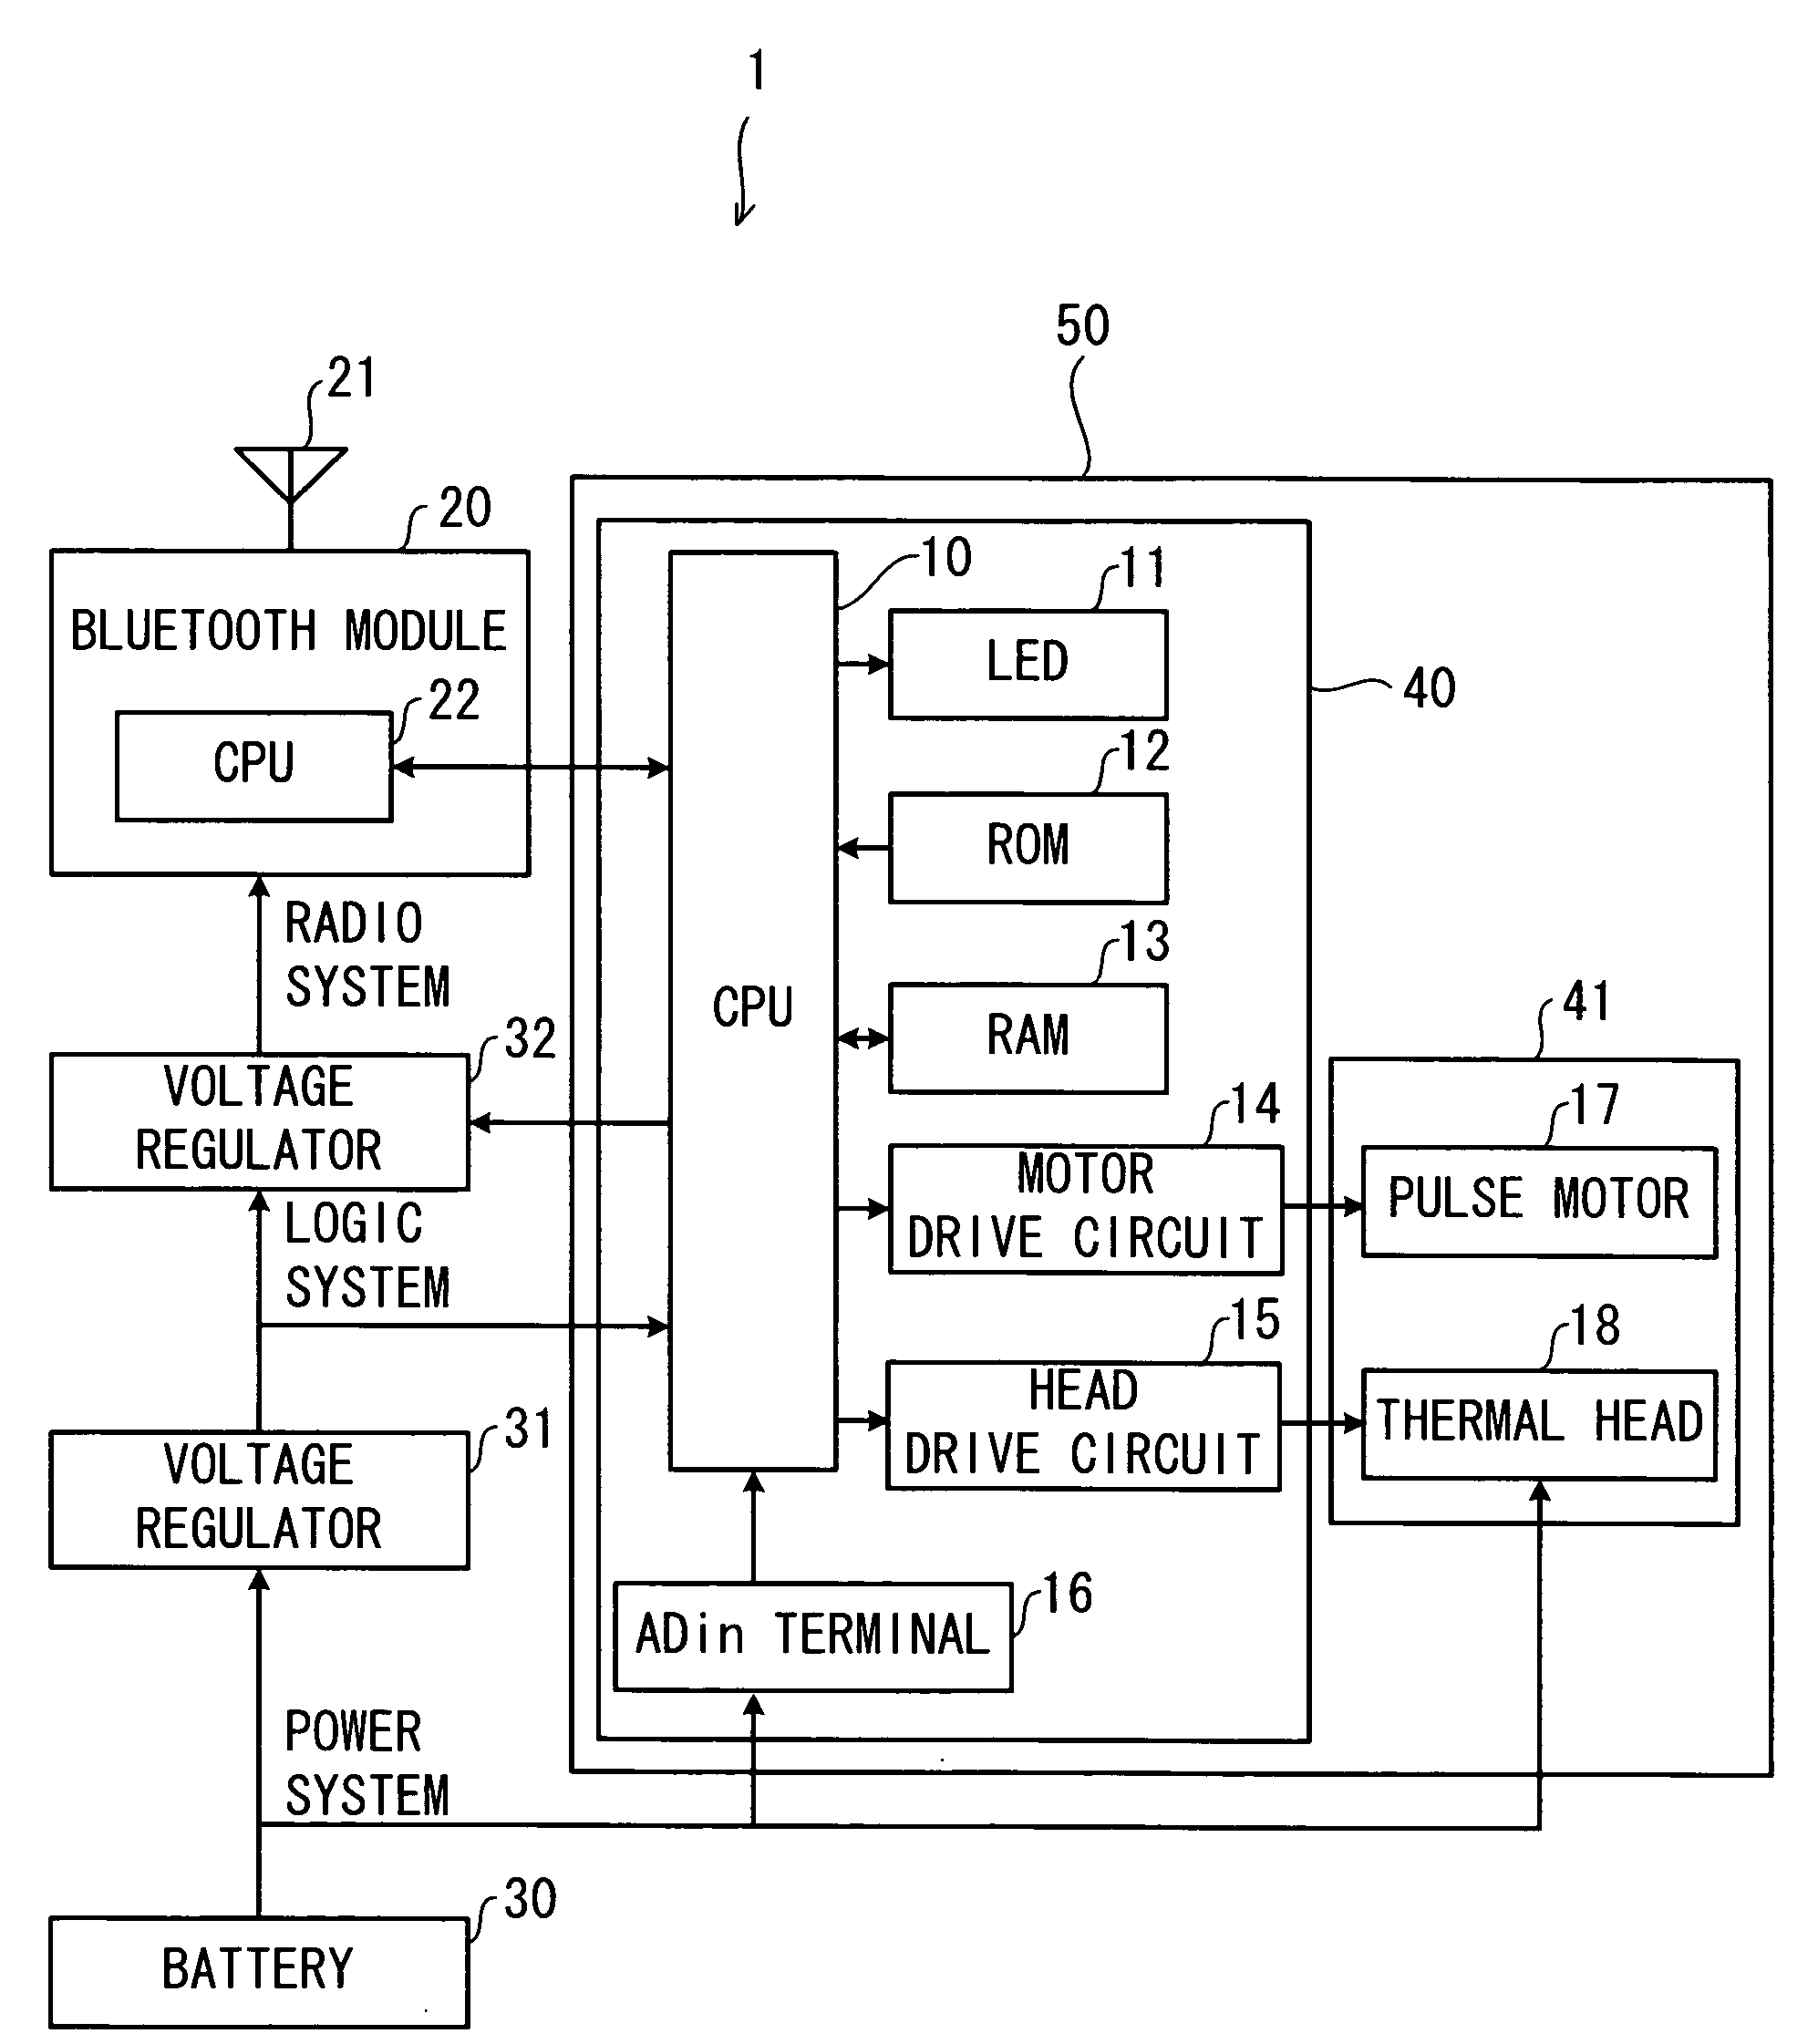 Electronic apparatus that conserves power